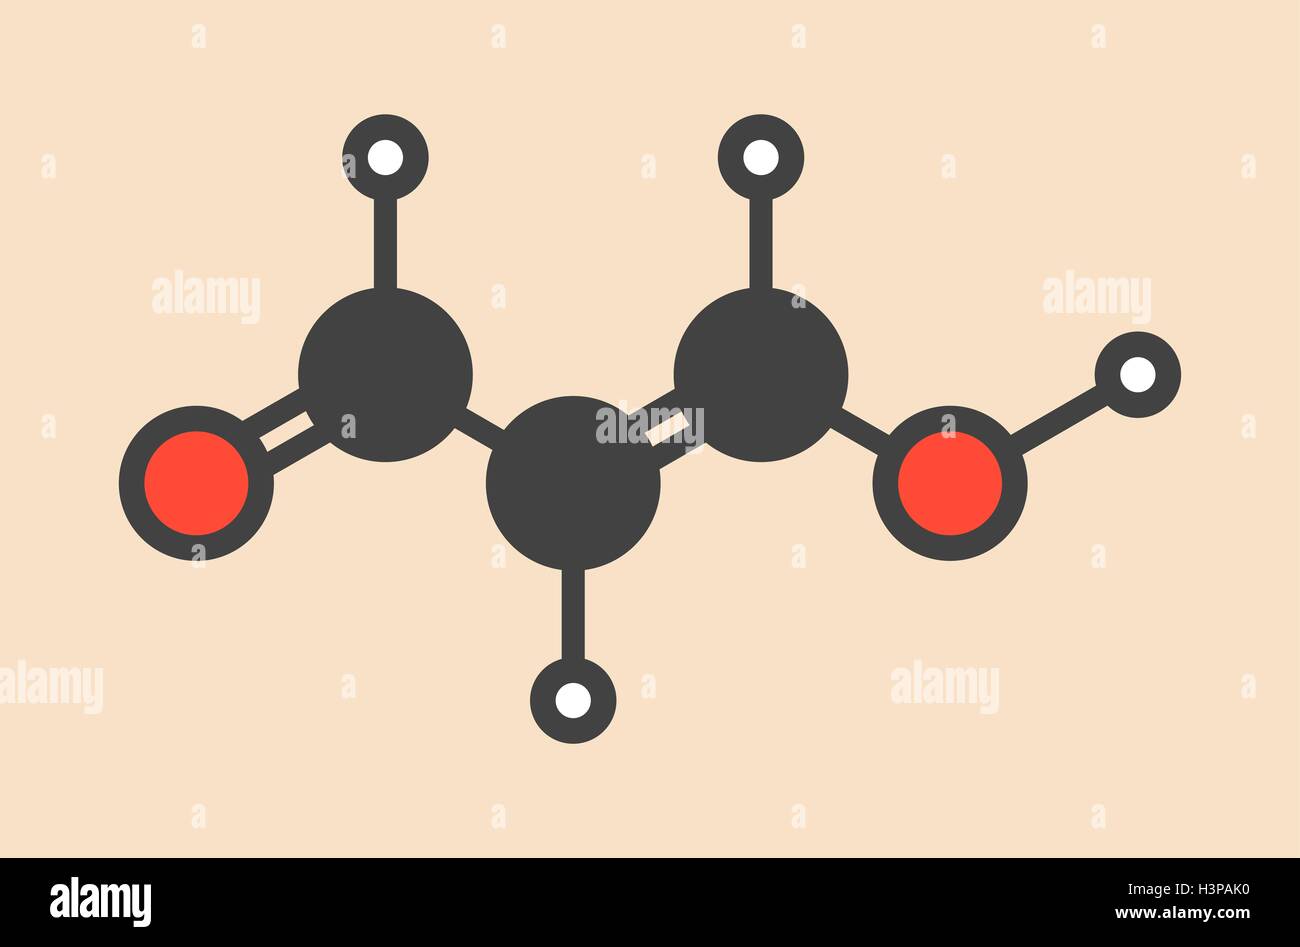 Malondialdehyde (MDA, enol form) molecule. Marker of oxidative stress and naturally produced during the lipid peroxidation of polyunsaturated fatty acids. Stylized skeletal formula (chemical structure). Atoms are shown as color-coded circles: hydrogen (white), carbon (grey), oxygen (red). Stock Photo